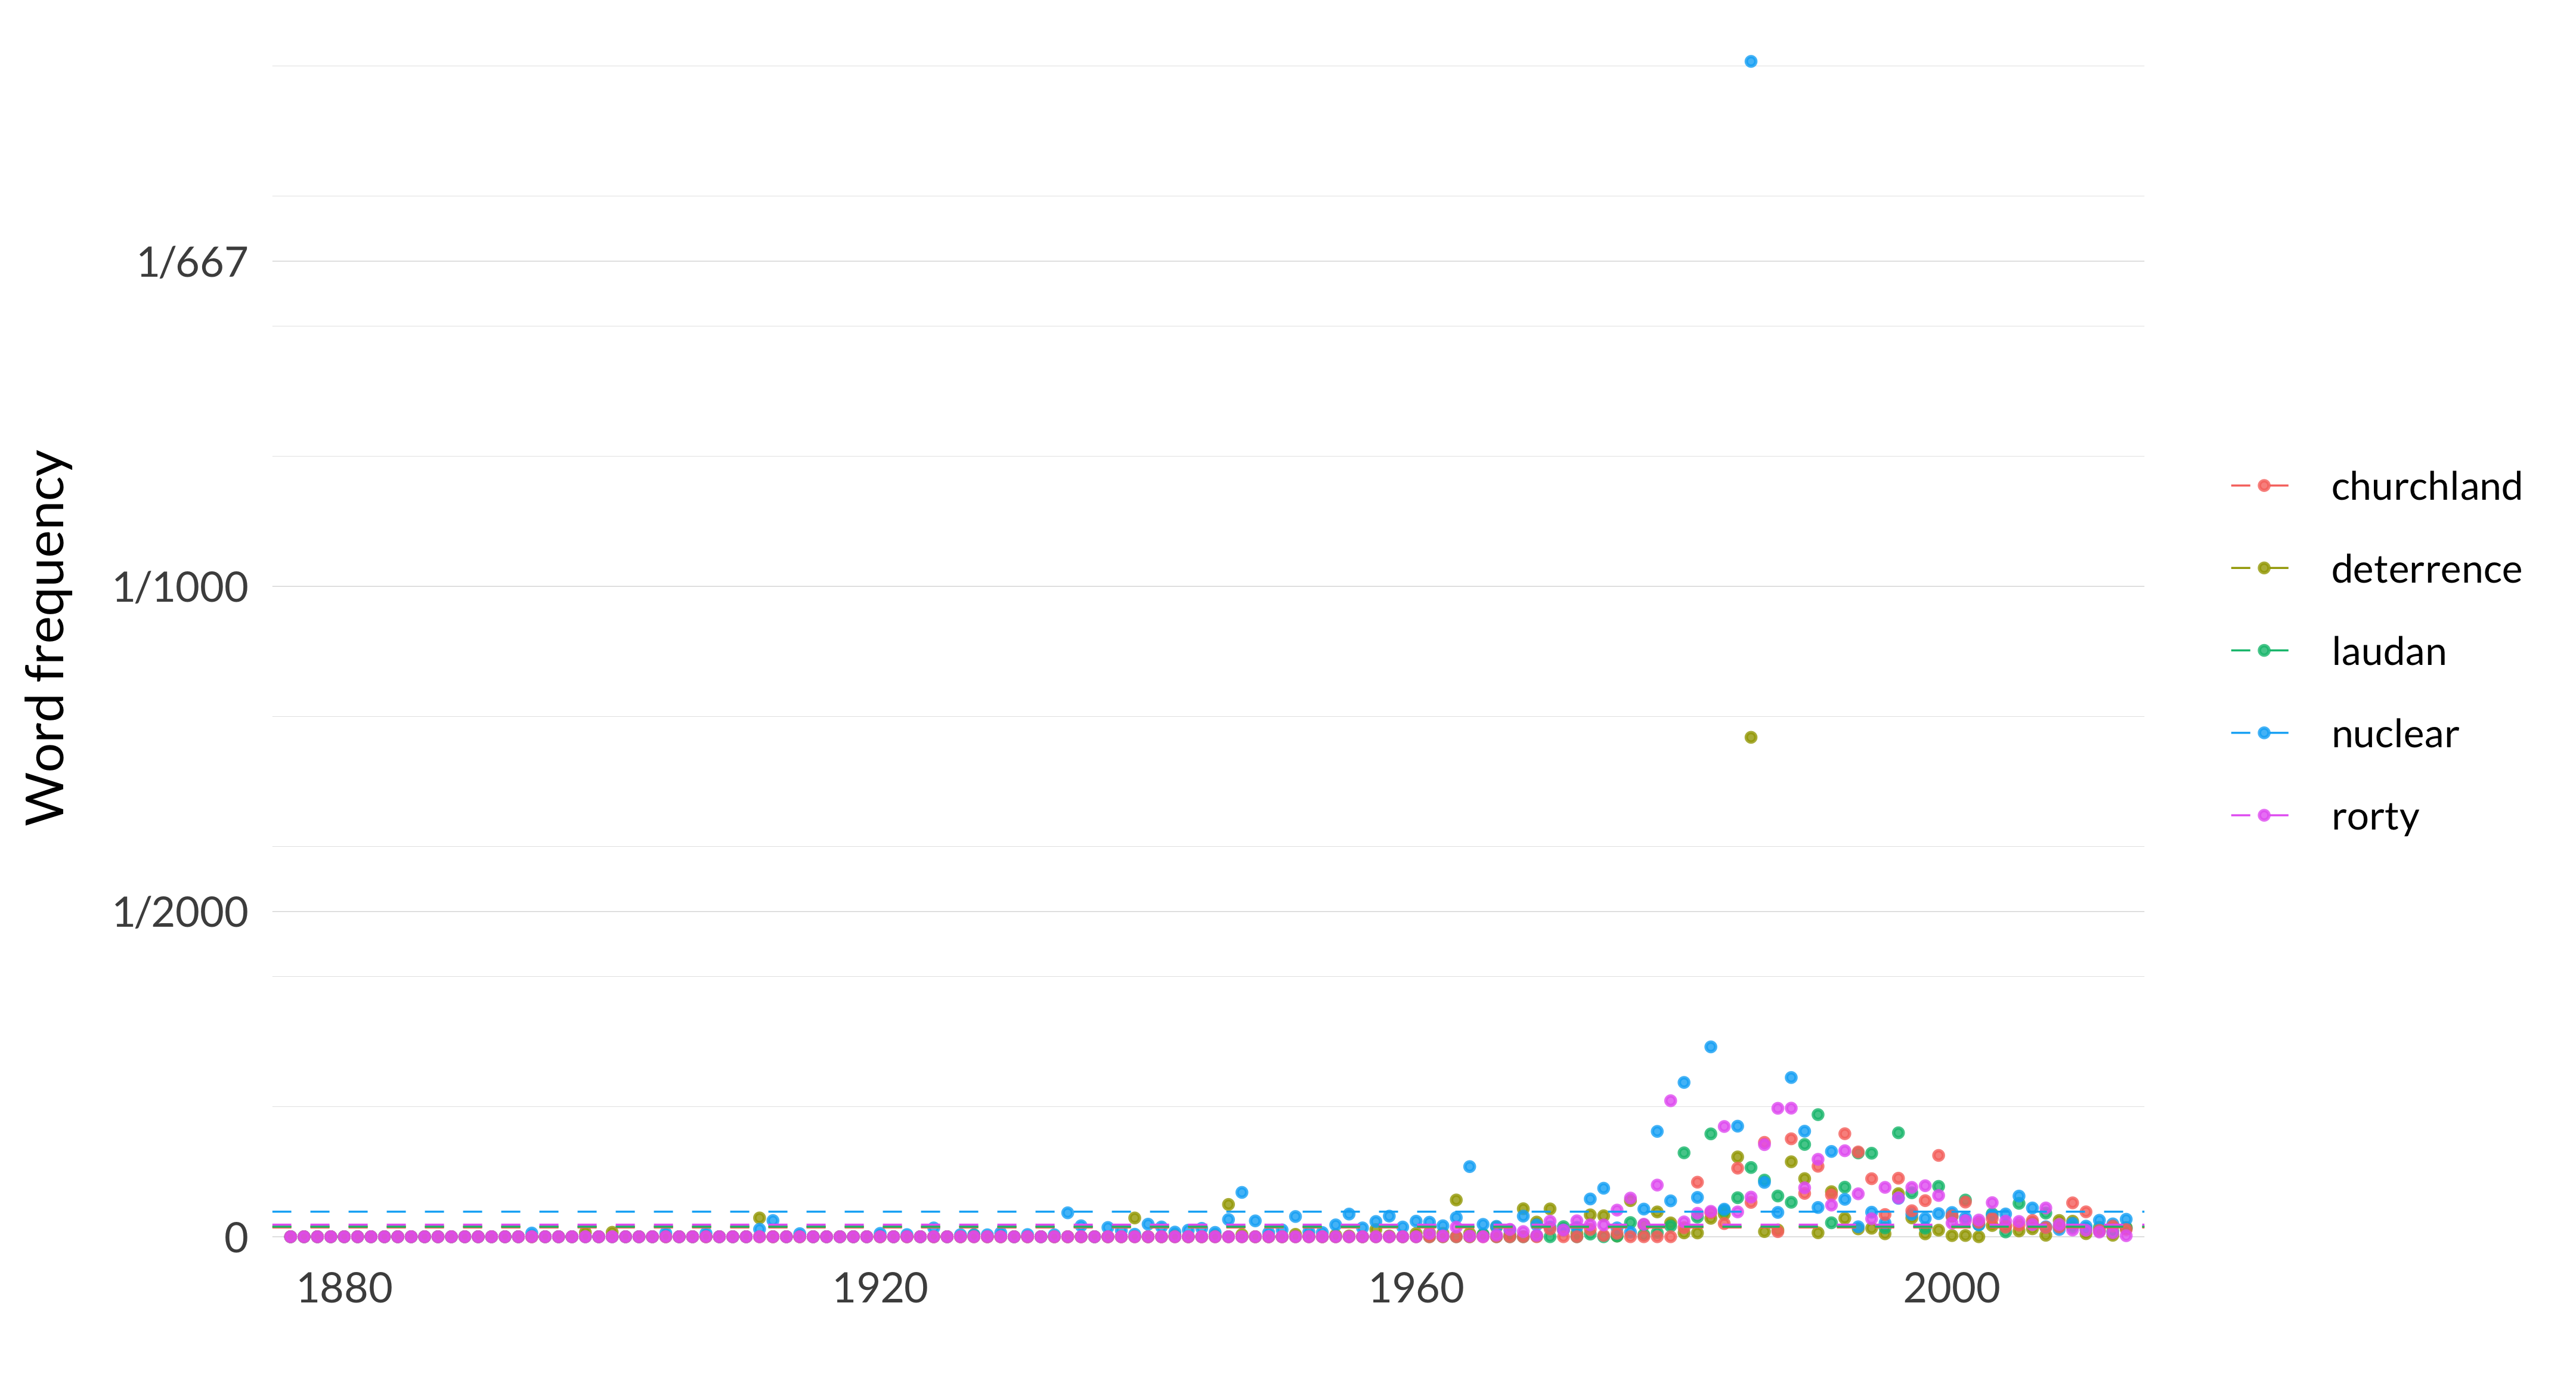 A scatterplot showing the frequency of the words deterrence, laudan, nuclear, churchland, rorty. The word deterrence appears, on average across the years, 16 times per million words, and in the median year, it appears 0 times per million words. Its most frequent occurrence is in 1985 when it appears 768 times per million words, and its least frequent occurrence is in 1876 when it appears 0 times per million words. The word laudan appears, on average across the years, 16 times per million words, and in the median year, it appears 0 times per million words. Its most frequent occurrence is in 1990 when it appears 188 times per million words, and its least frequent occurrence is in 1876 when it appears 0 times per million words. The word nuclear appears, on average across the years, 39 times per million words, and in the median year, it appears 12 times per million words. Its most frequent occurrence is in 1985 when it appears 1807 times per million words, and its least frequent occurrence is in 1876 when it appears 0 times per million words. The word churchland appears, on average across the years, 14 times per million words, and in the median year, it appears 0 times per million words. Its most frequent occurrence is in 1992 when it appears 158 times per million words, and its least frequent occurrence is in 1876 when it appears 0 times per million words. The word rorty appears, on average across the years, 19 times per million words, and in the median year, it appears 0 times per million words. Its most frequent occurrence is in 1979 when it appears 209 times per million words, and its least frequent occurrence is in 1876 when it appears 0 times per million words. 